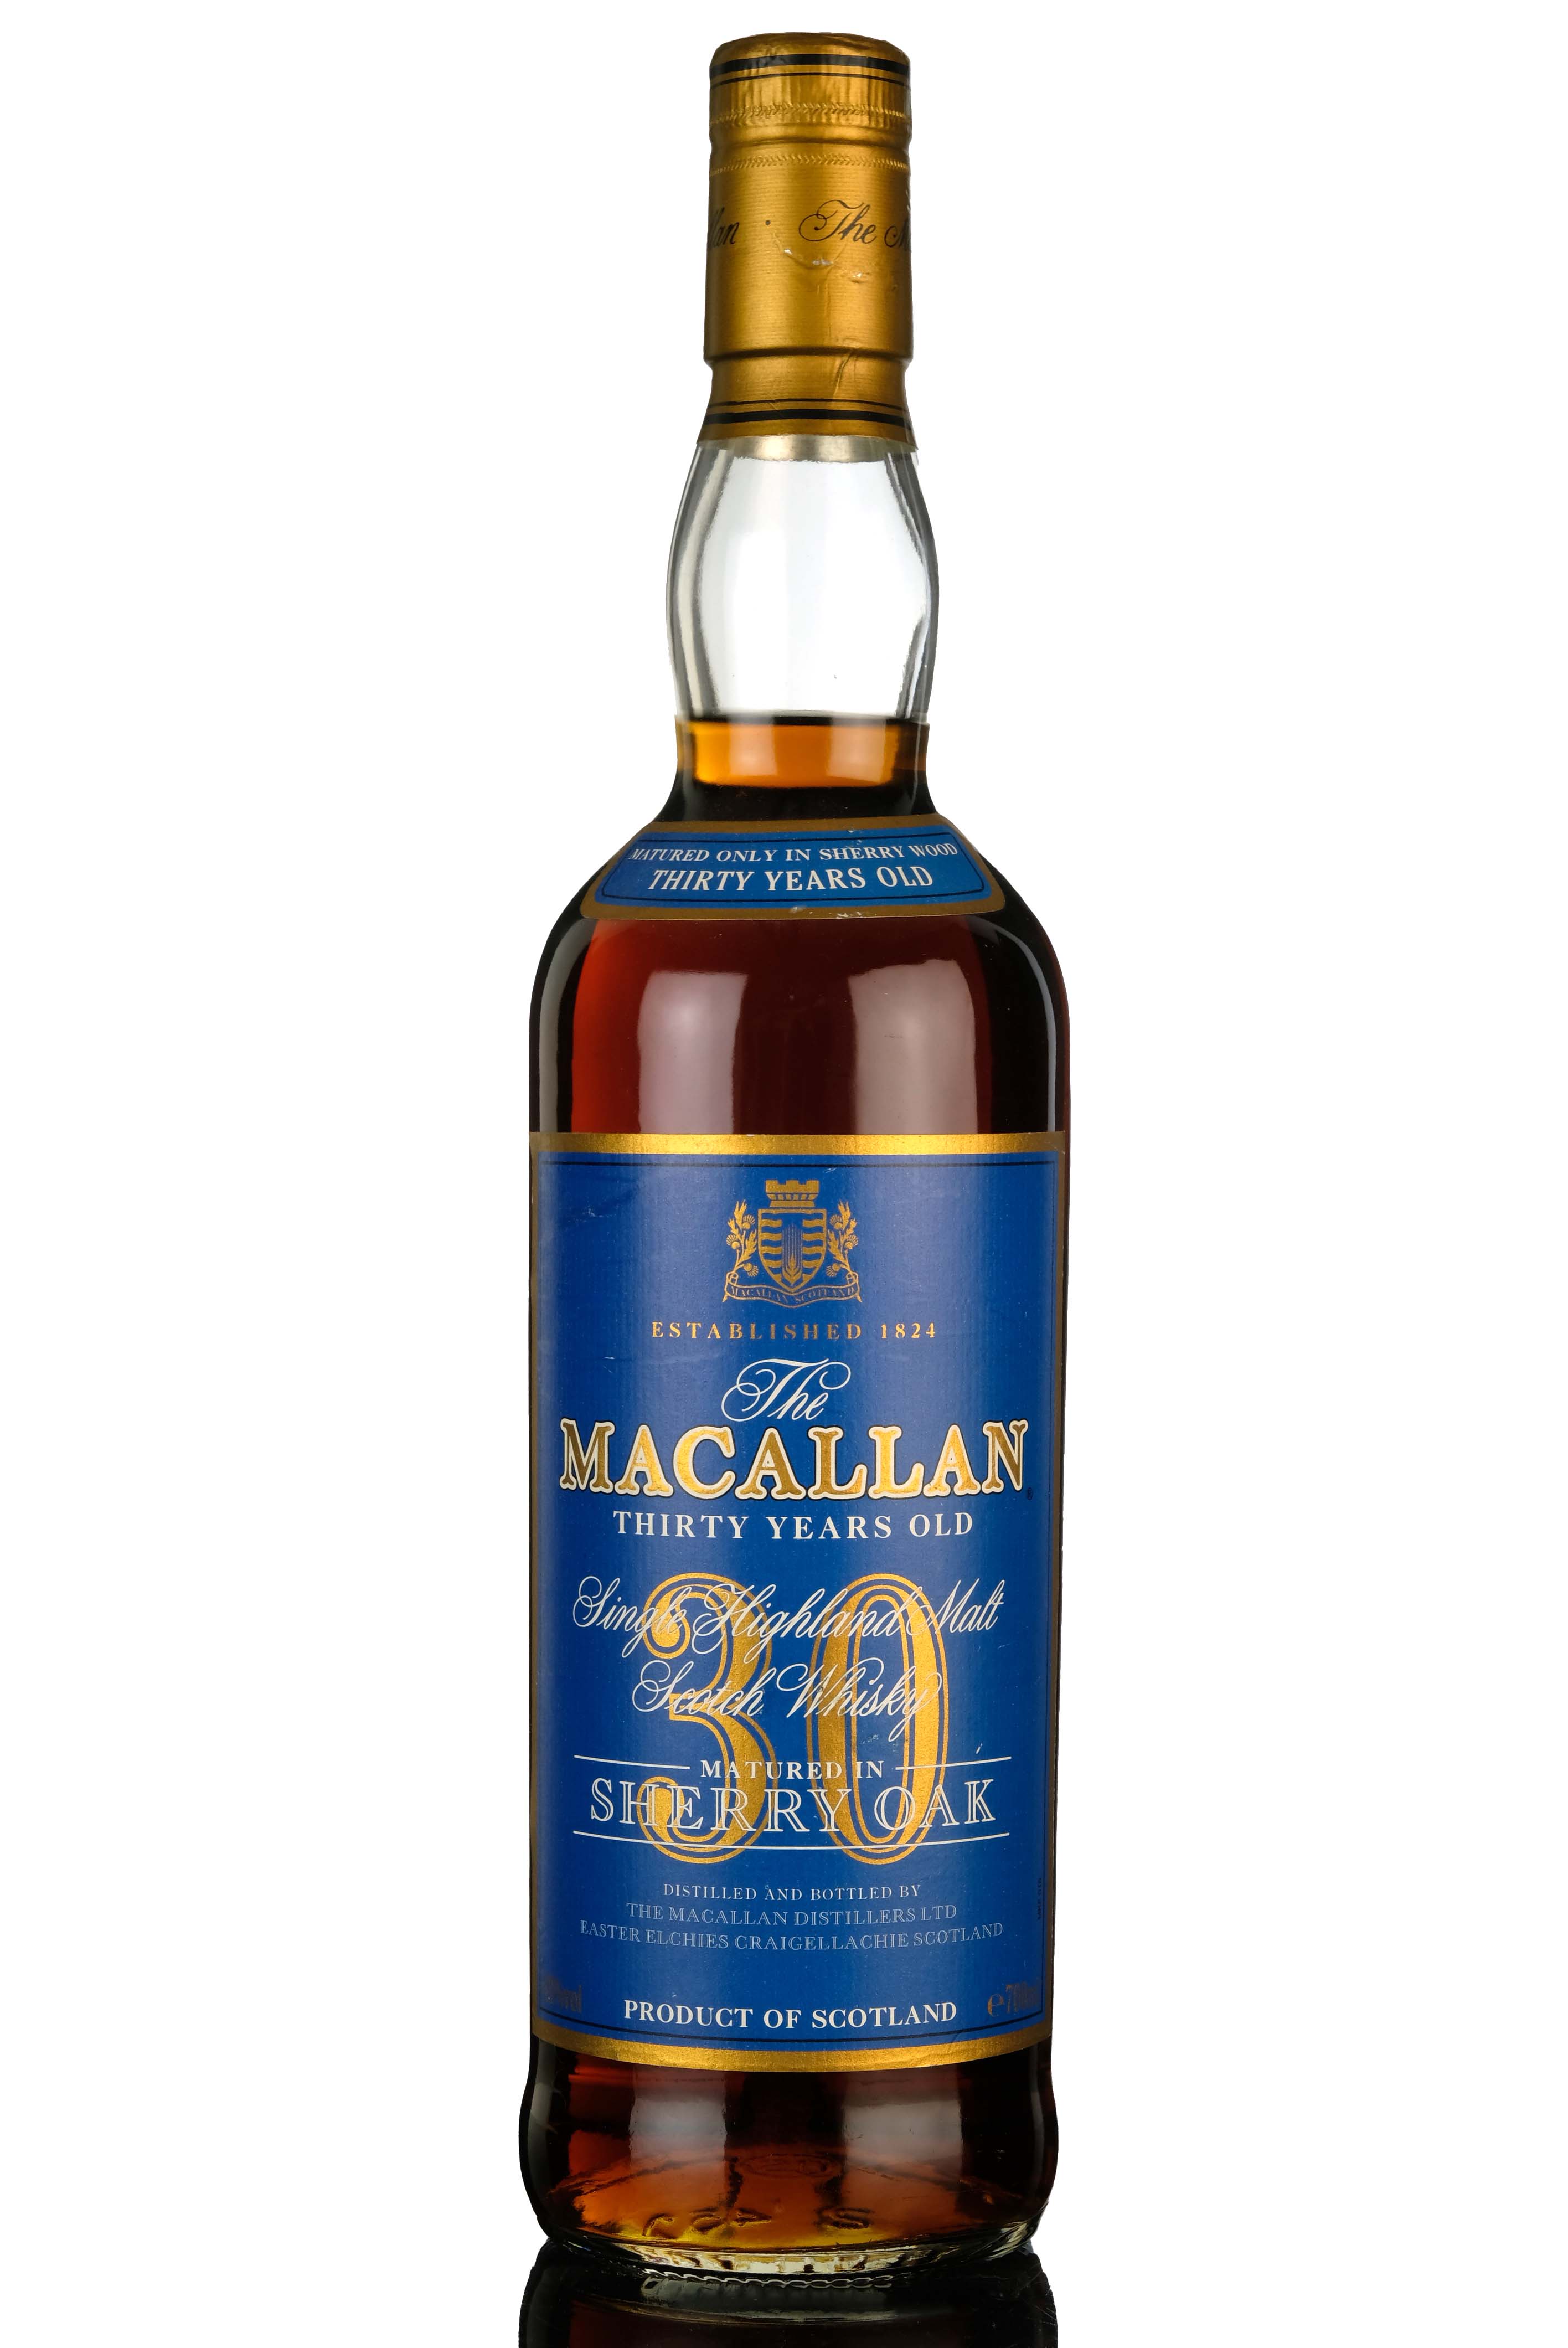 Macallan 30 Year Old - Sherry Cask - Blue Label